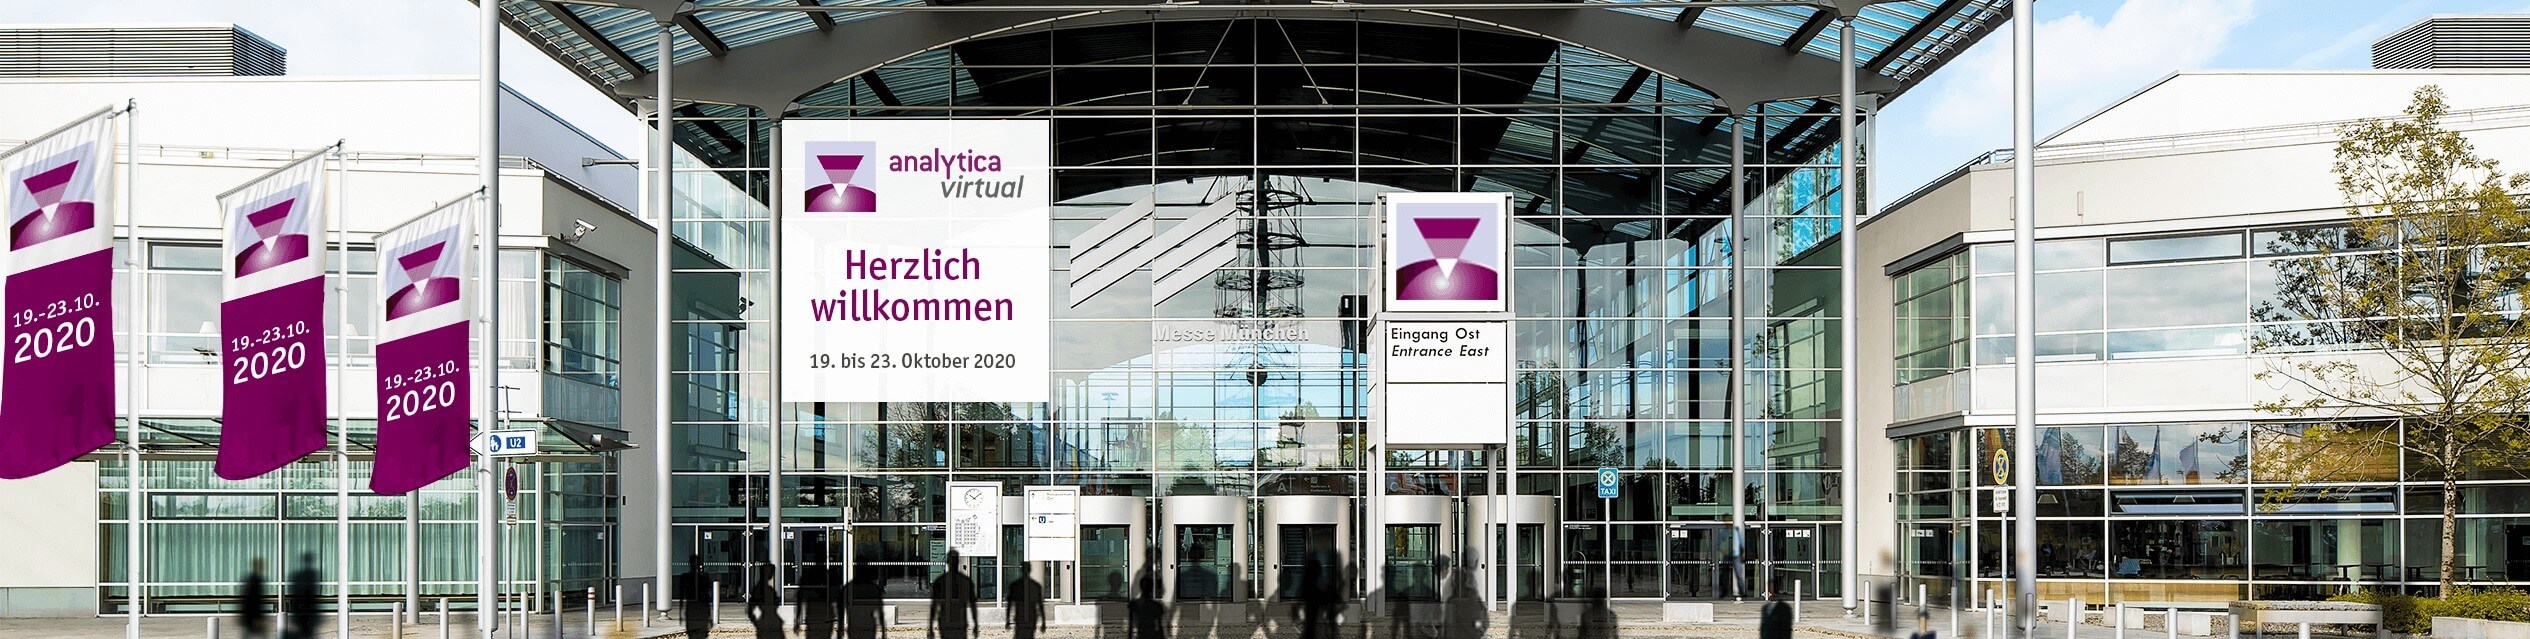 analytica virtual messehalle